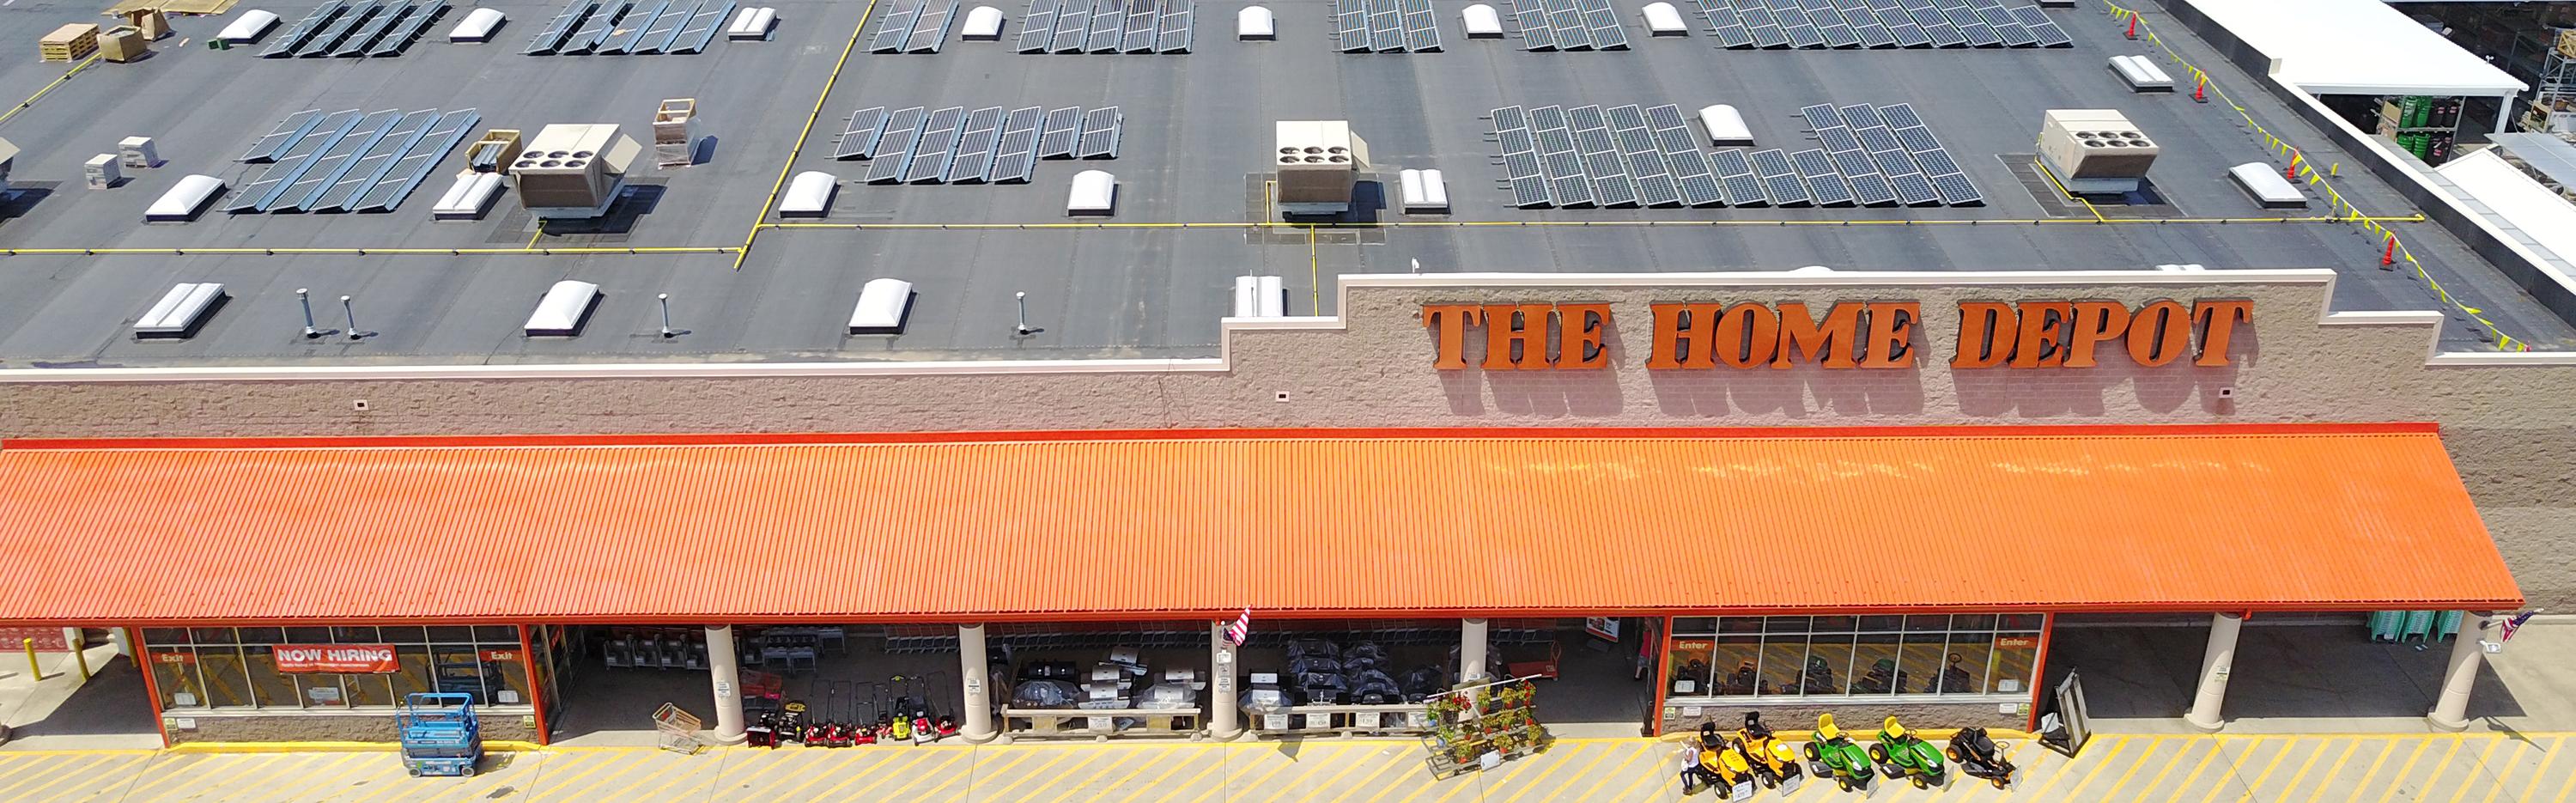 Home Depot roof filled with solar panels